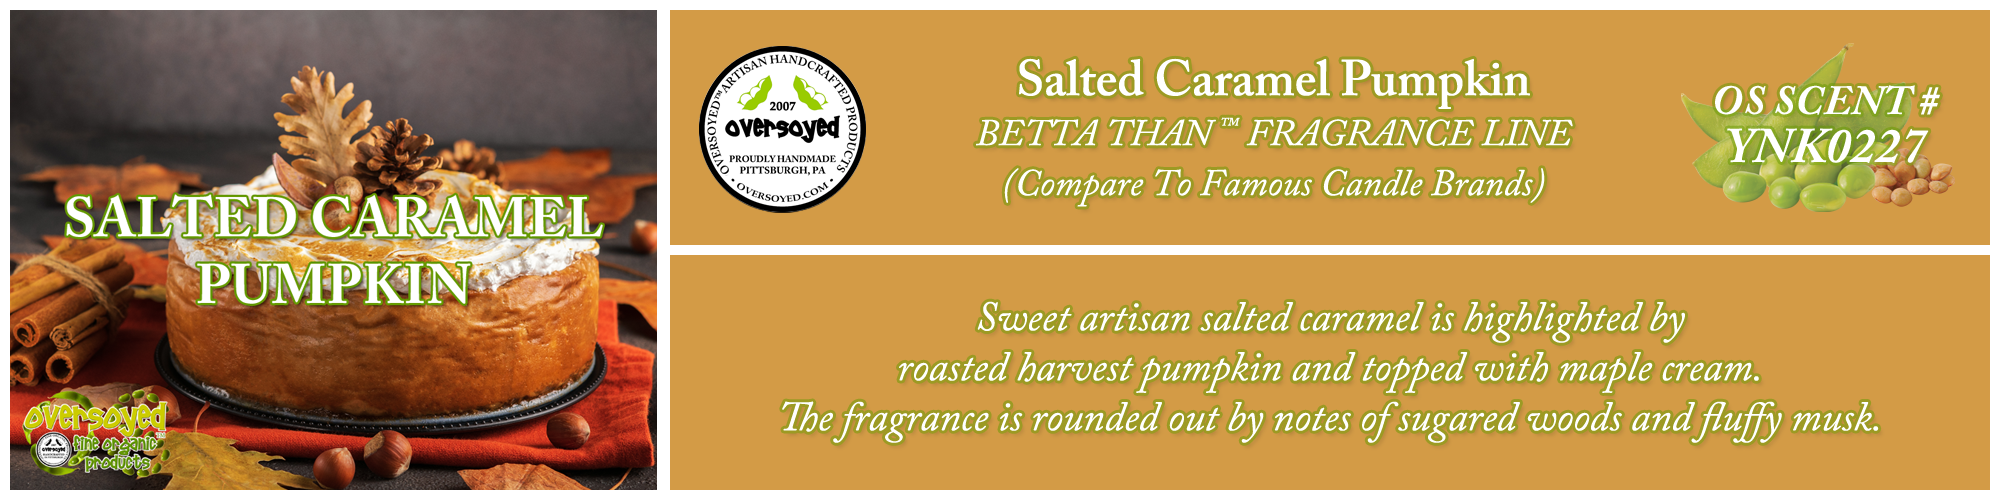 Salted Caramel Pumpkin Handcrafted Products Collection